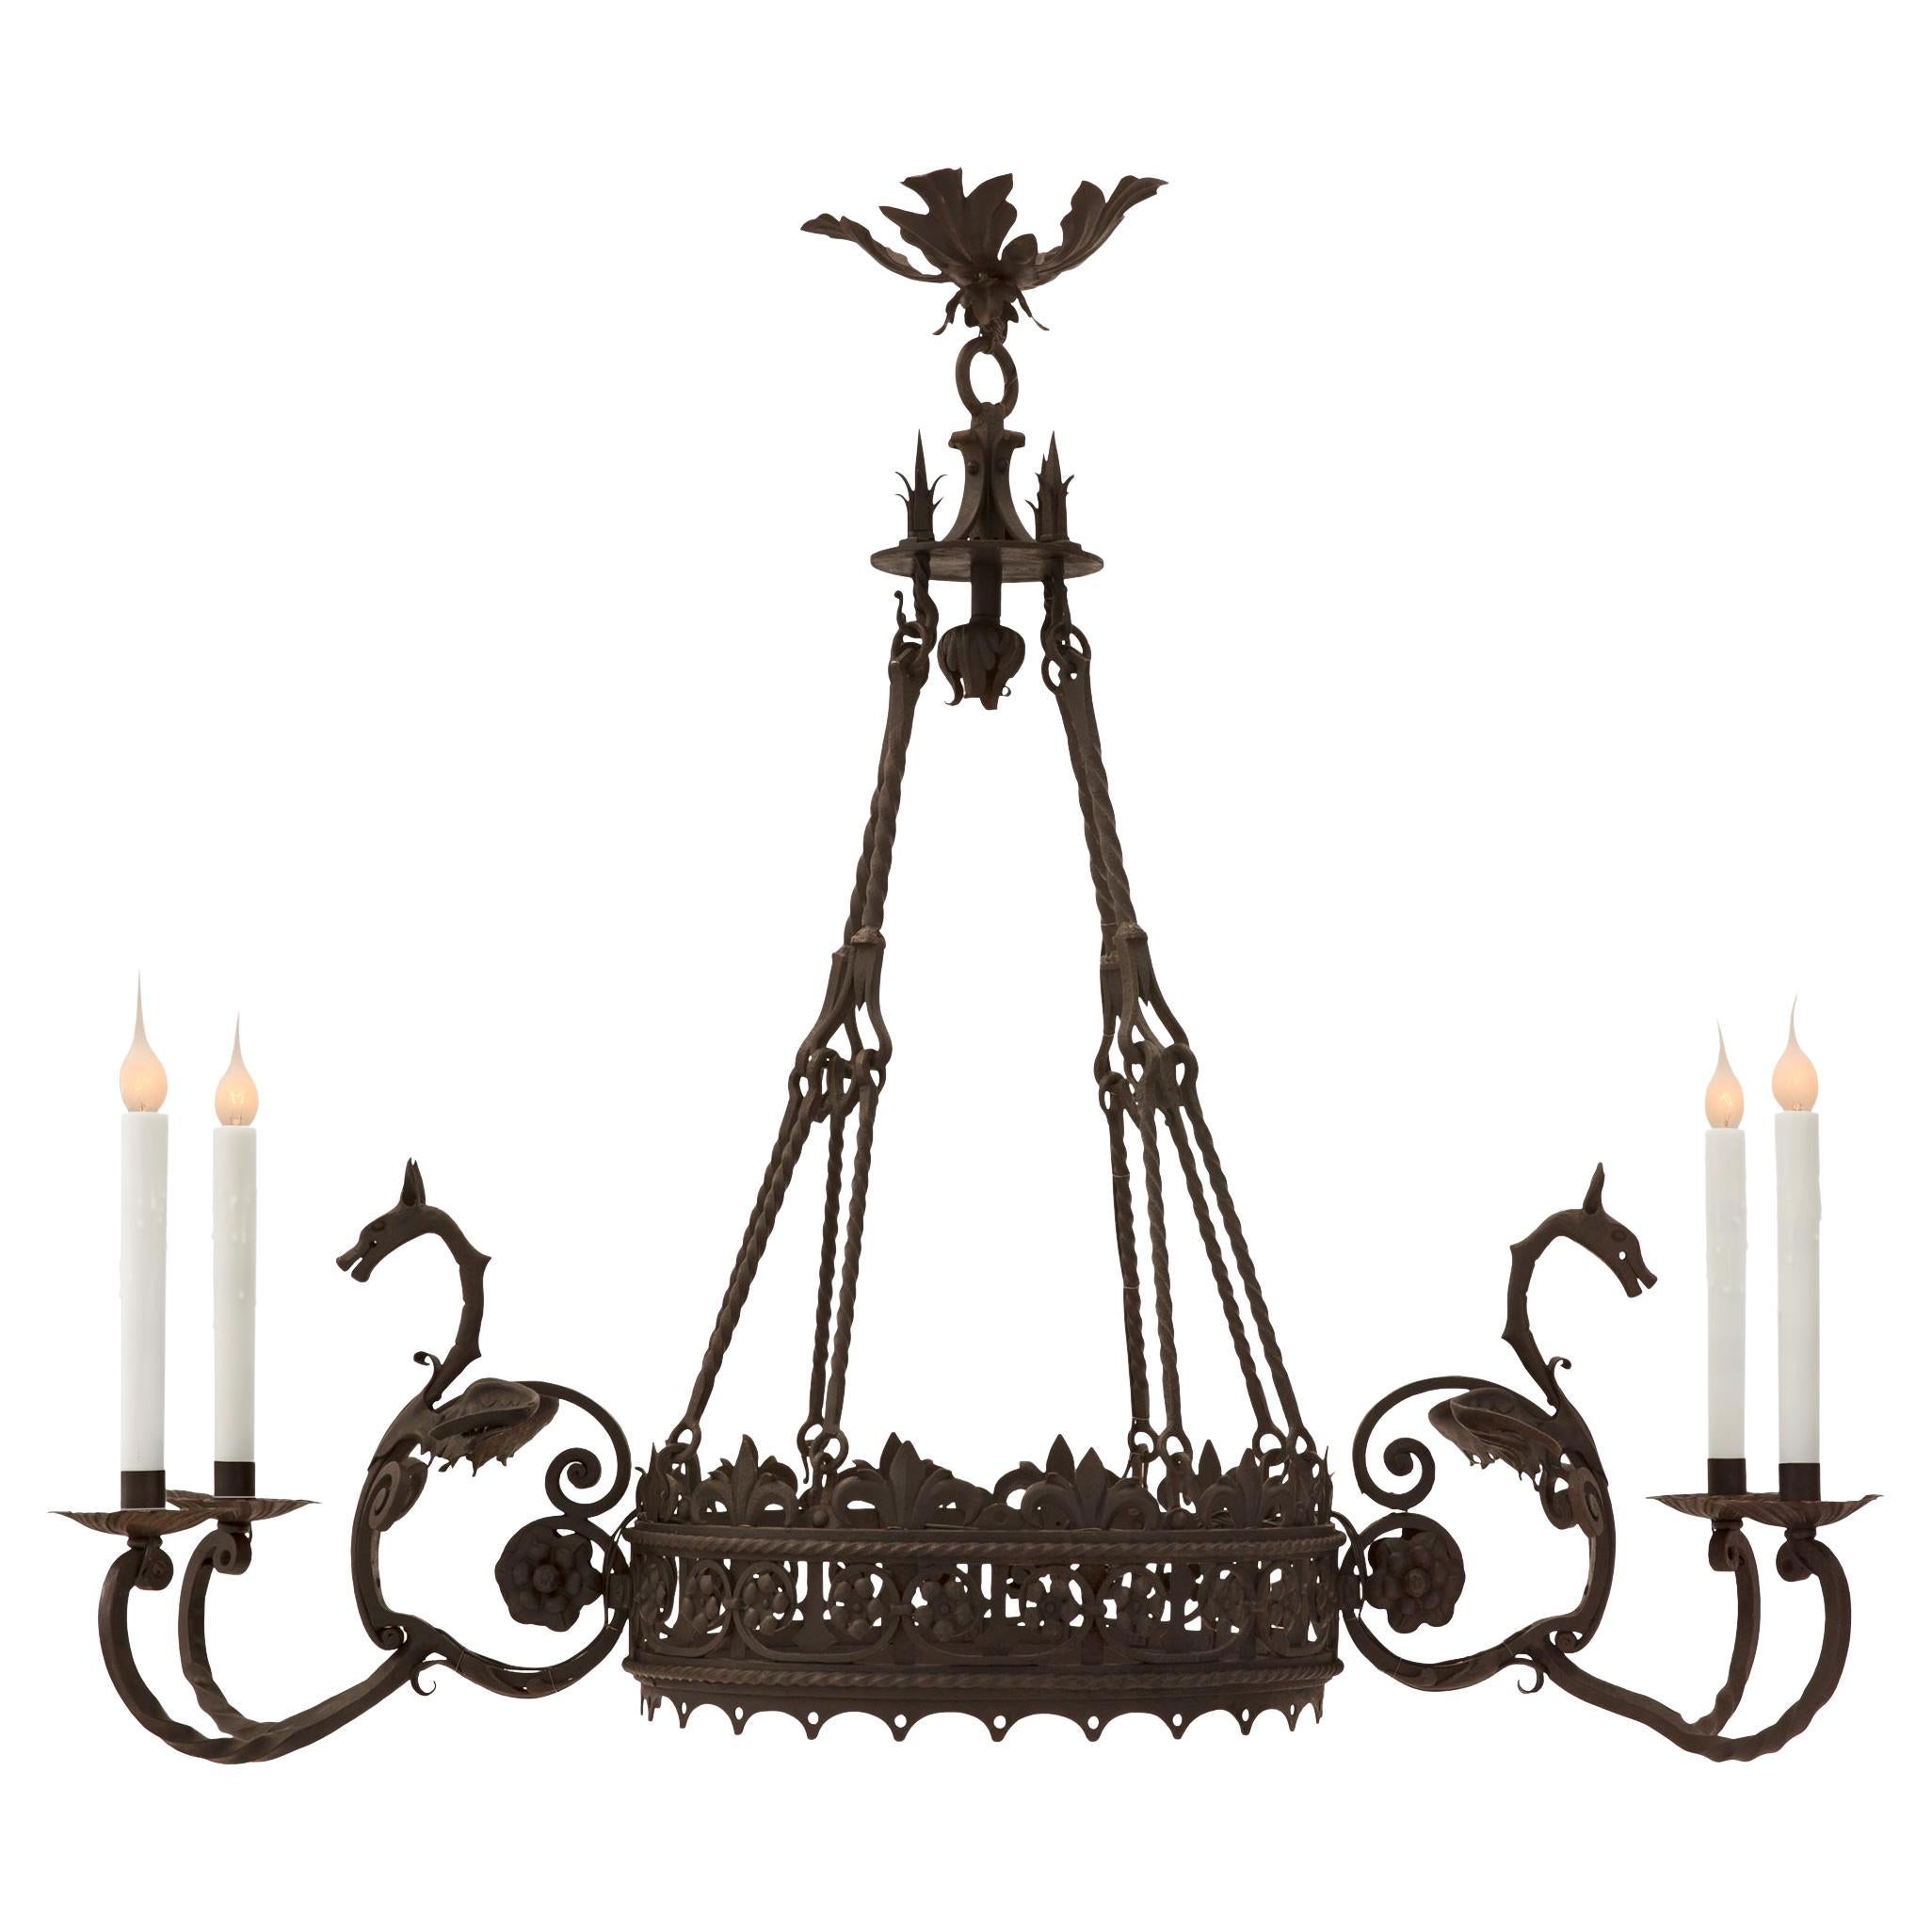 A striking and unique French 19th century Renaissance st. wrought iron chandelier. The four light oblong shaped chandelier is centered by a charming bottom floral finial below the circular central support displaying beautiful pierced scrolled